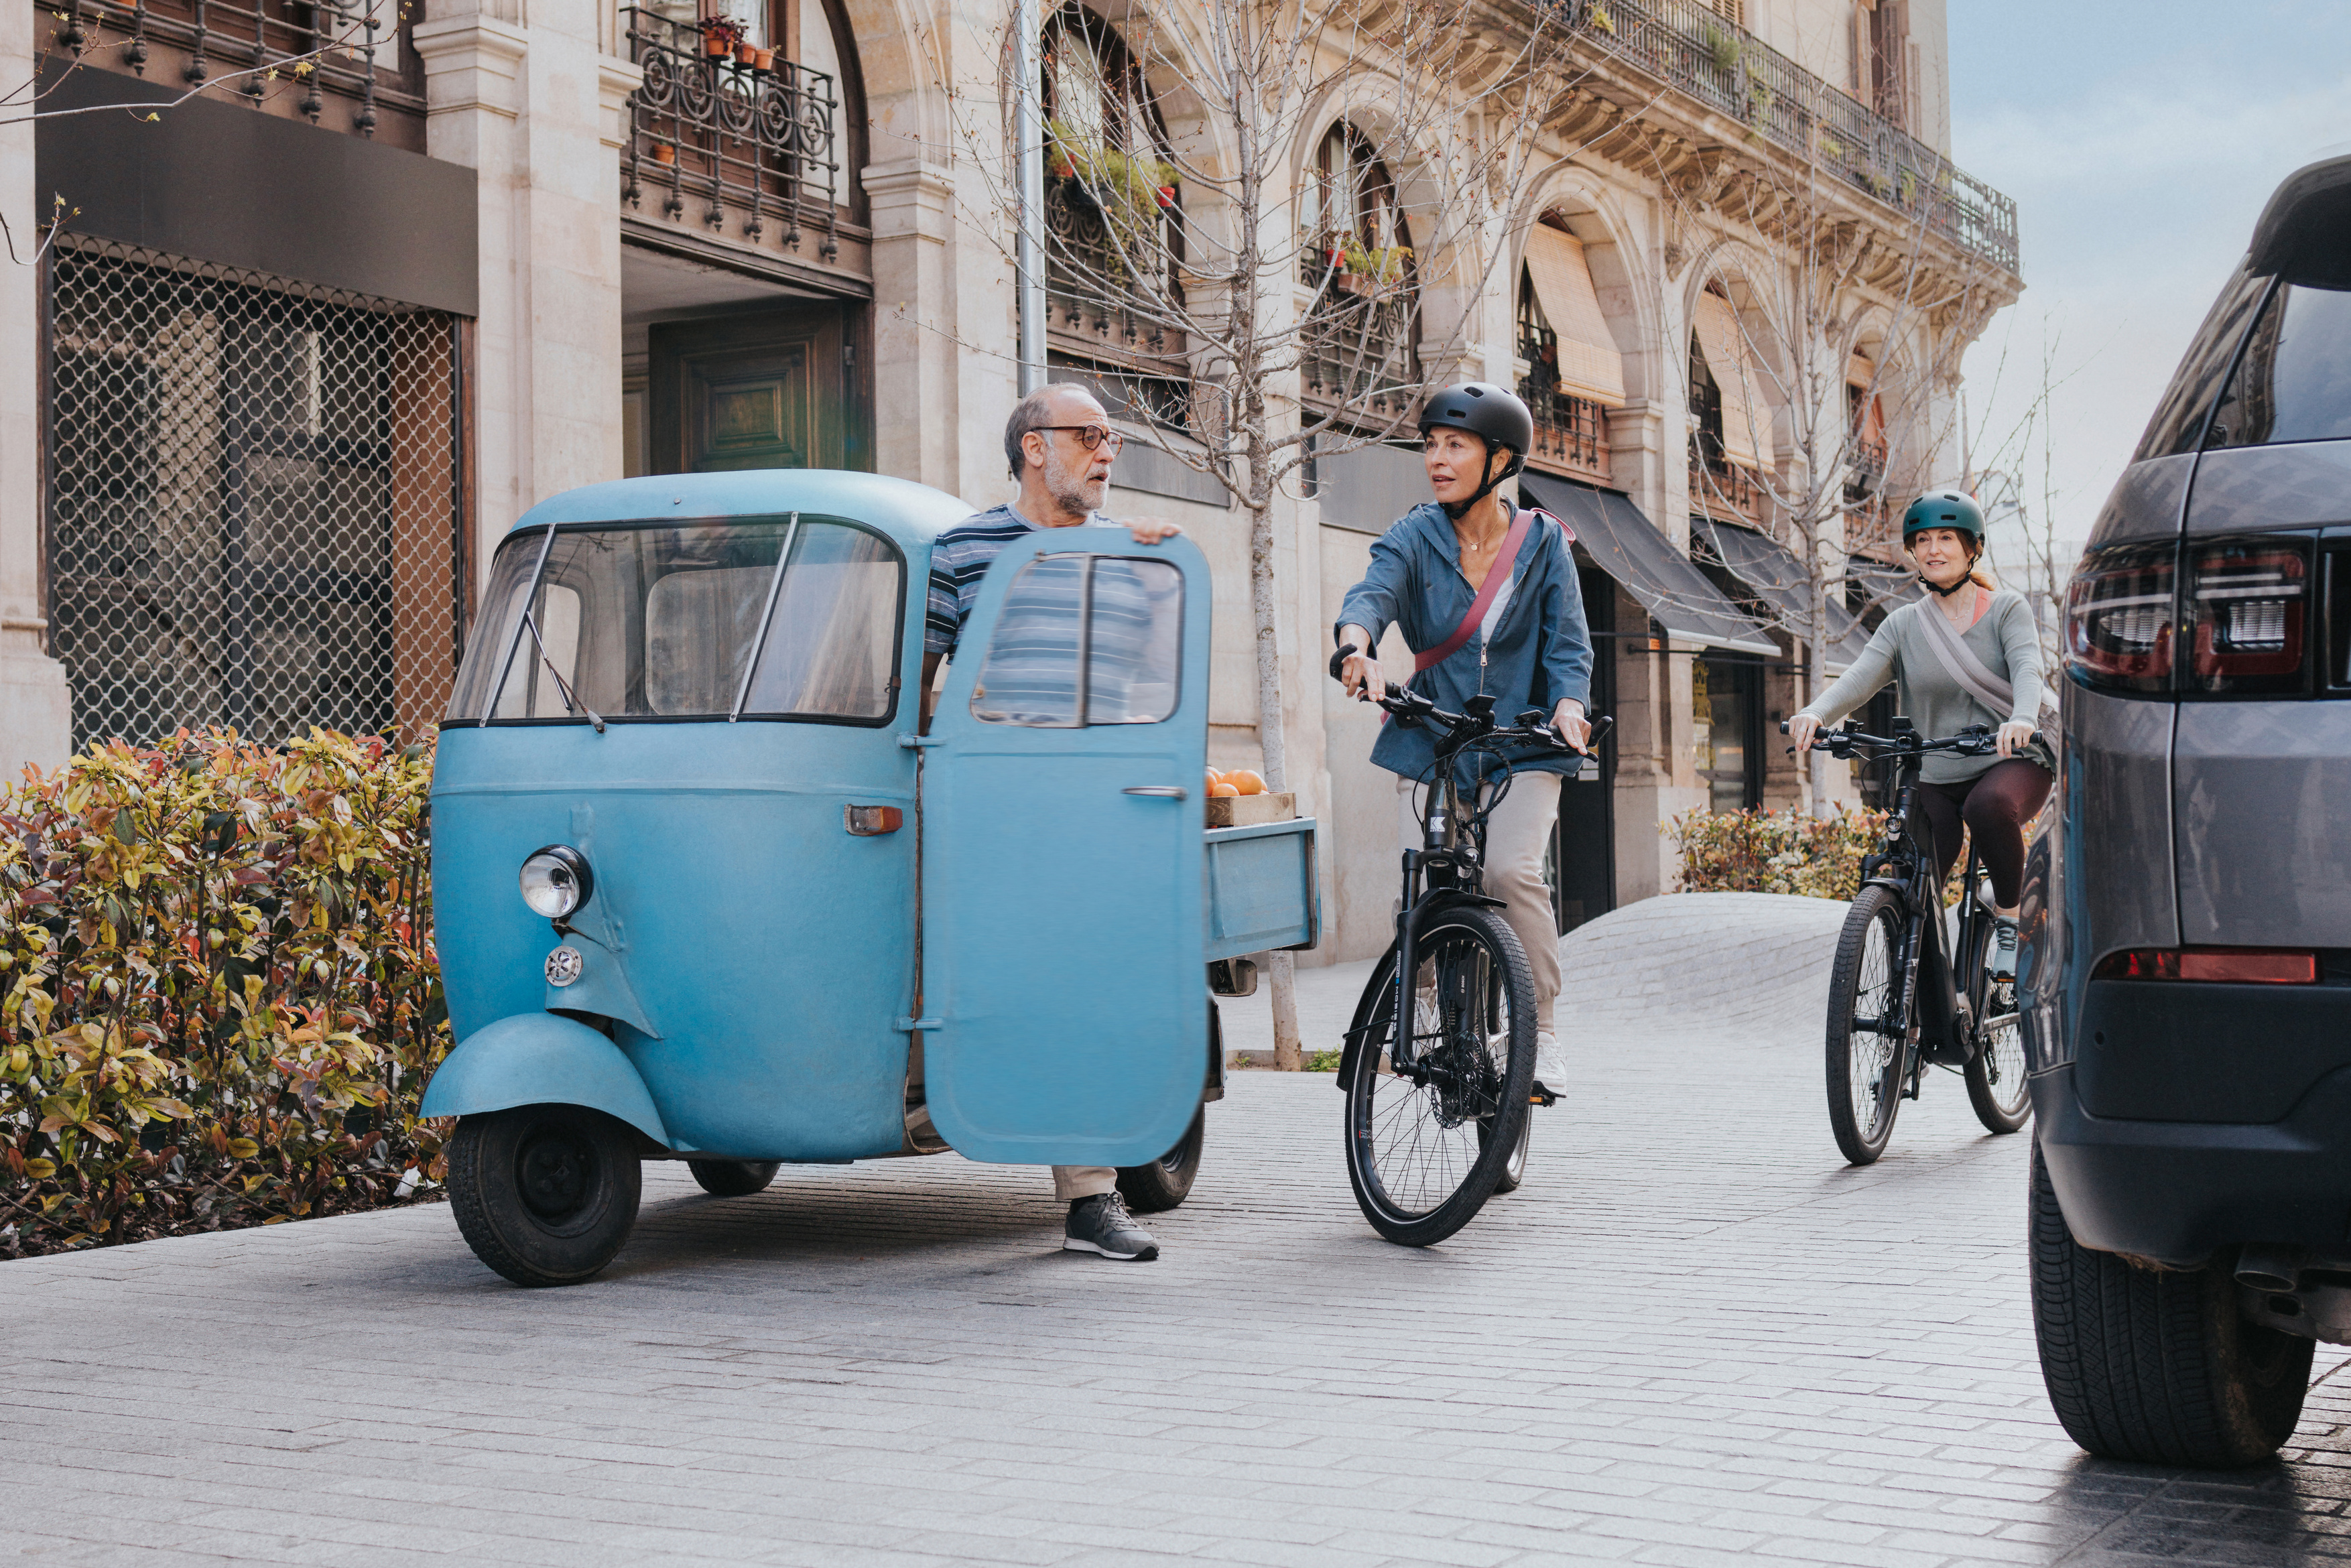 Safer and more carefree riding: The new eBike ABS for the smart system significantly reduces the risk of falling or being thrown over the handlebar.